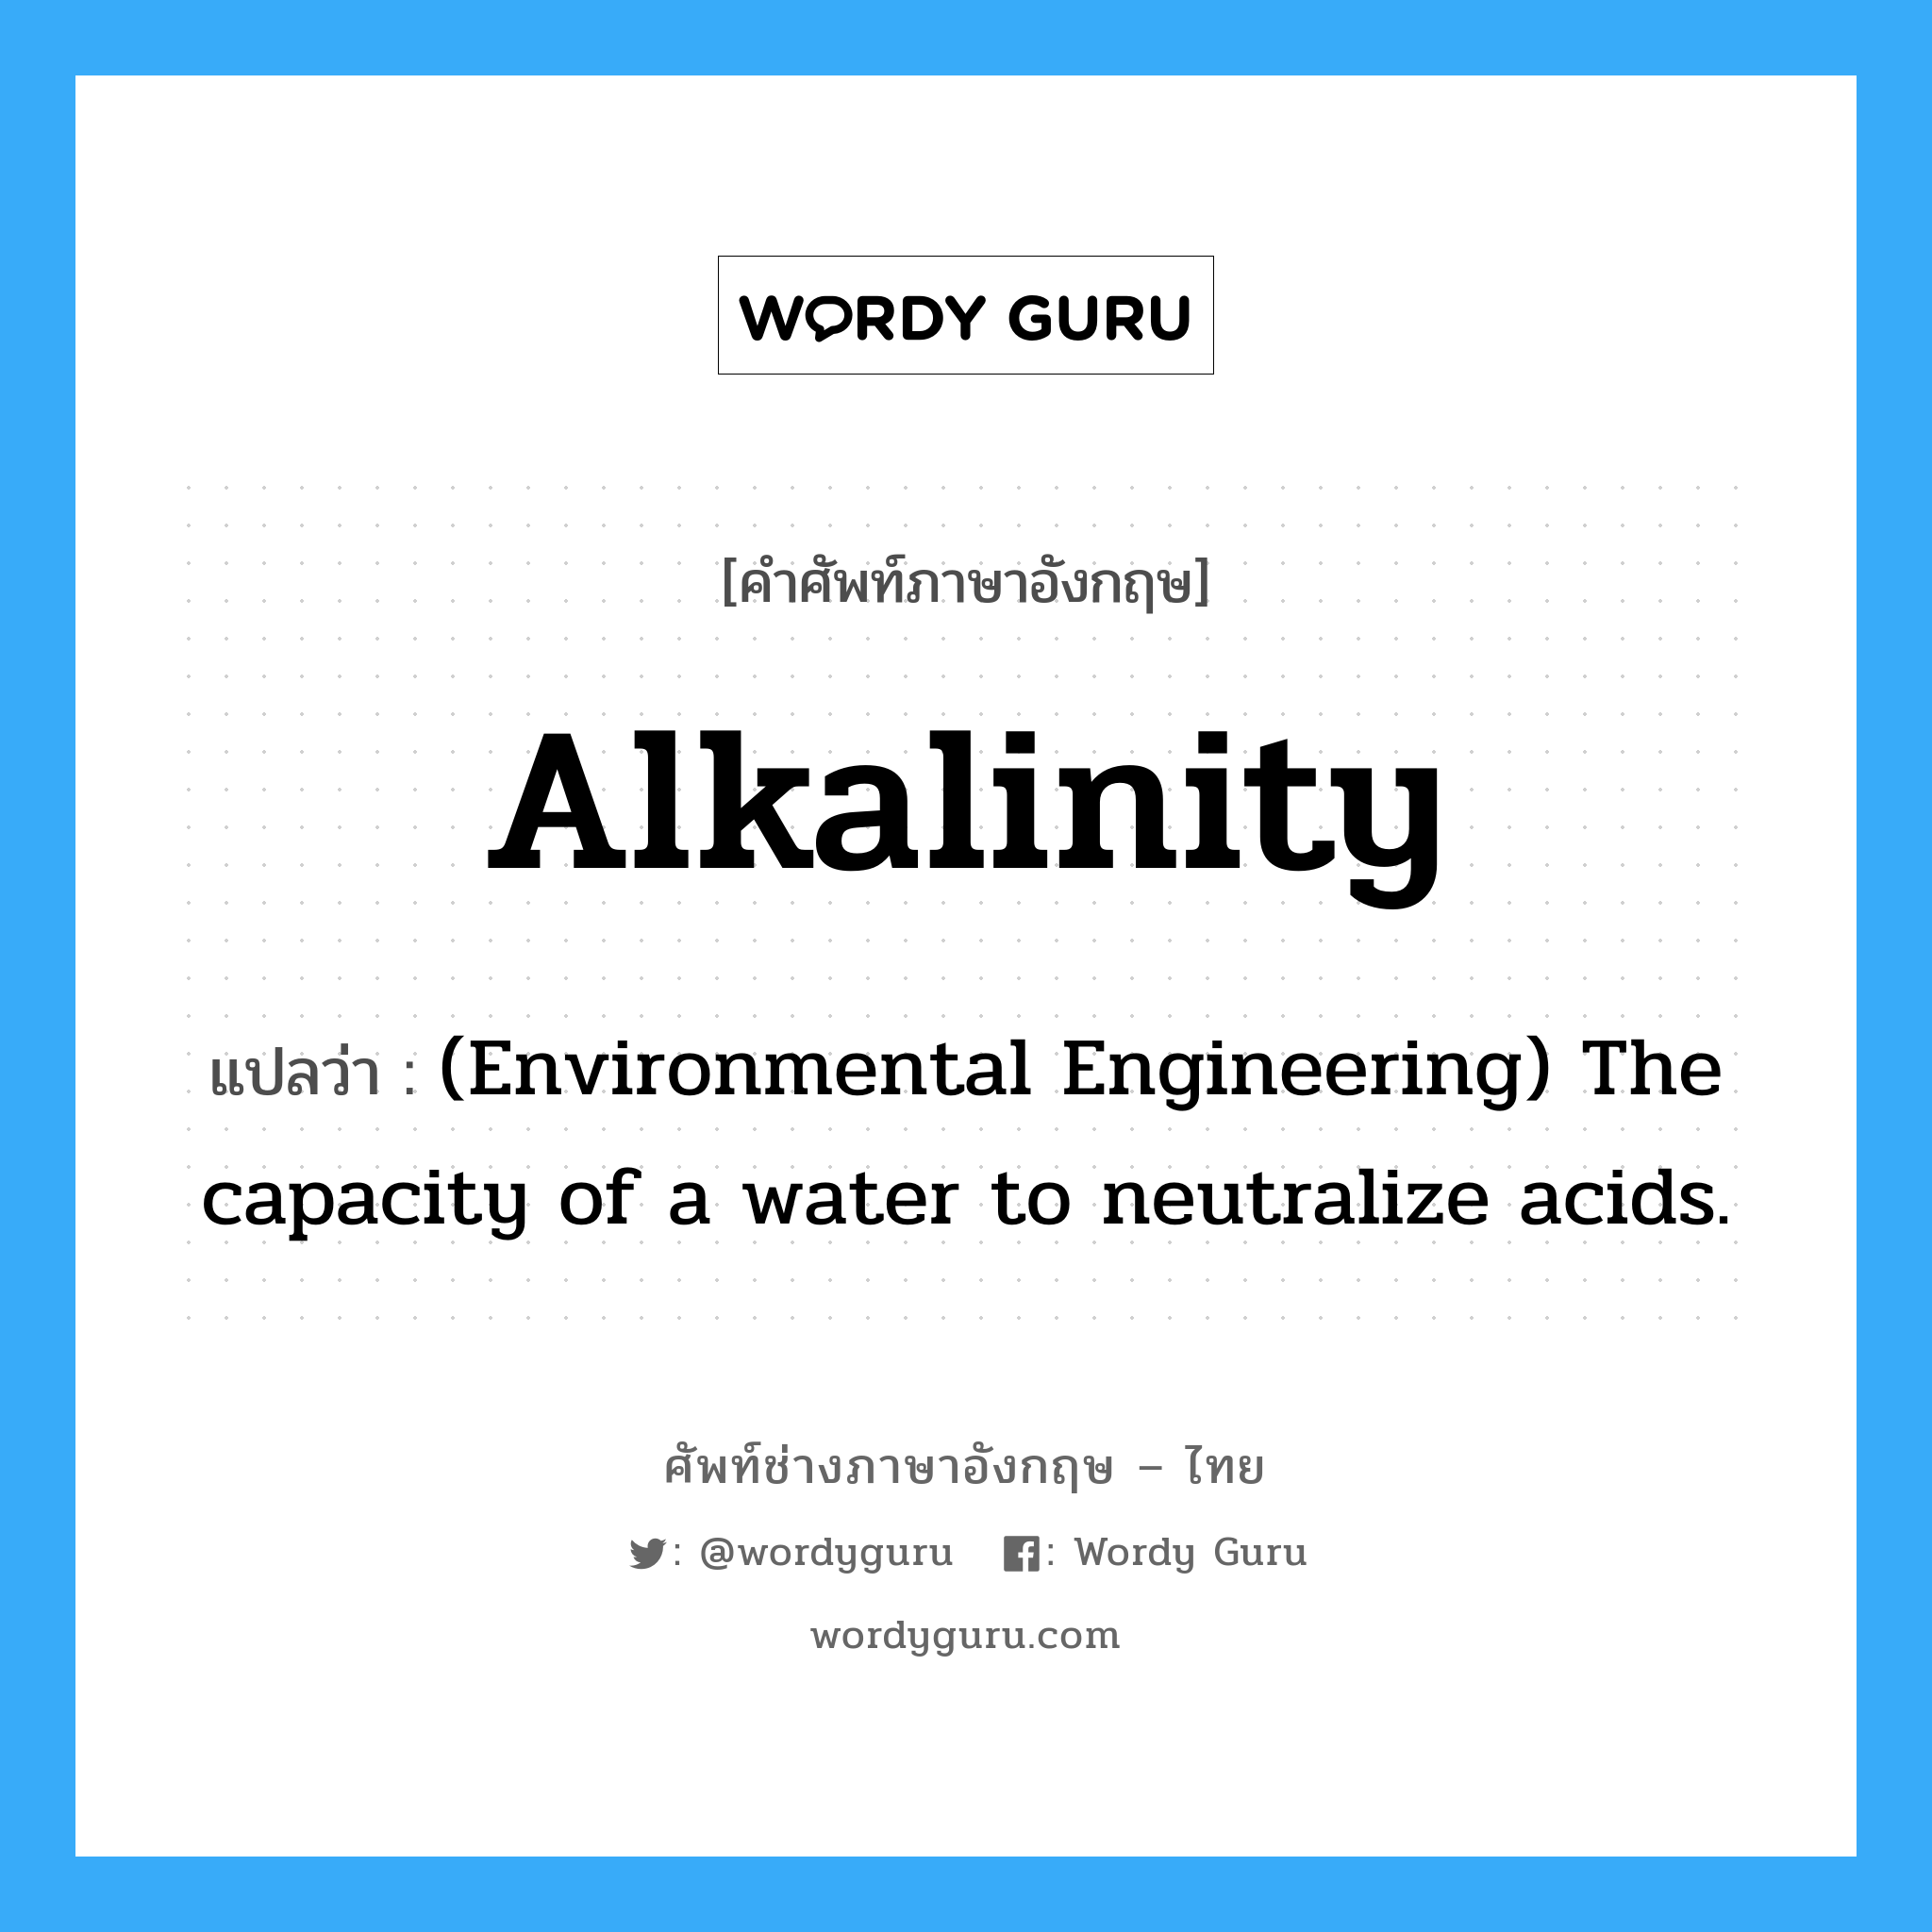 (Environmental Engineering) The capacity of a water to neutralize acids. ภาษาอังกฤษ?, คำศัพท์ช่างภาษาอังกฤษ - ไทย (Environmental Engineering) The capacity of a water to neutralize acids. คำศัพท์ภาษาอังกฤษ (Environmental Engineering) The capacity of a water to neutralize acids. แปลว่า Alkalinity